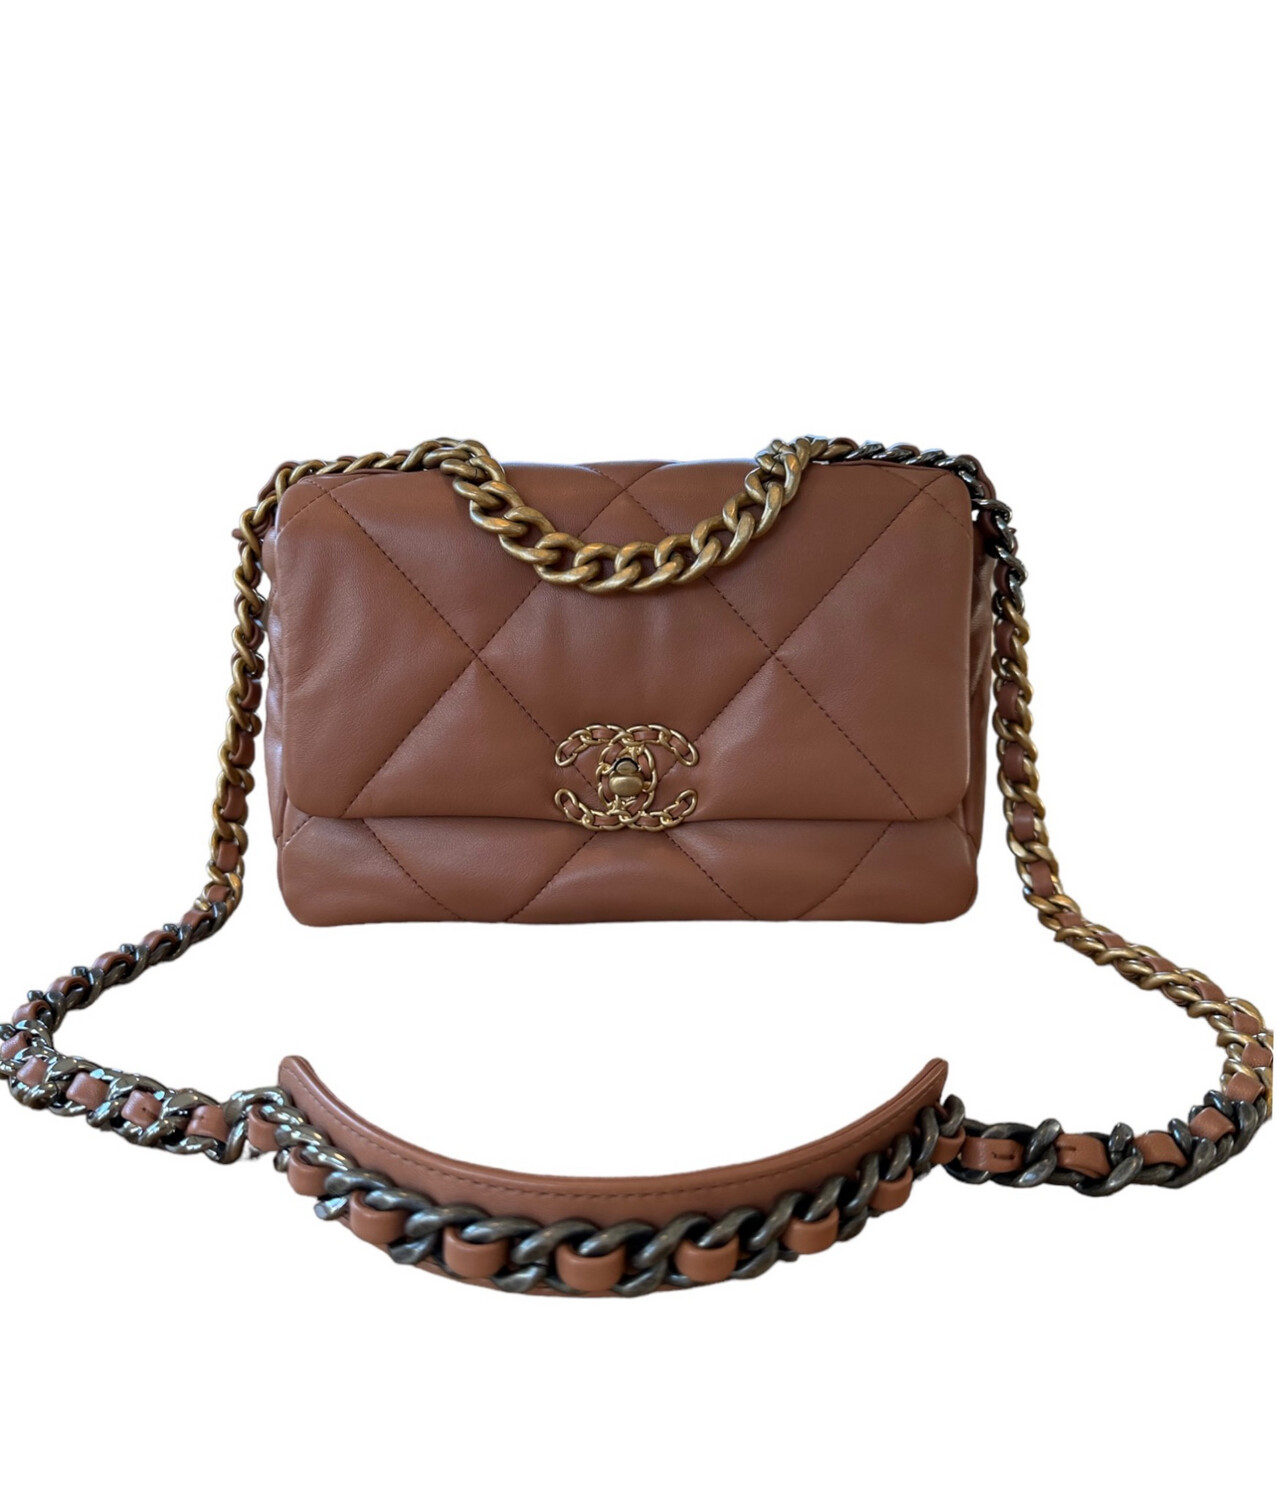 Chanel Lambskin Quilted Large Chanel 19 Flap Brown